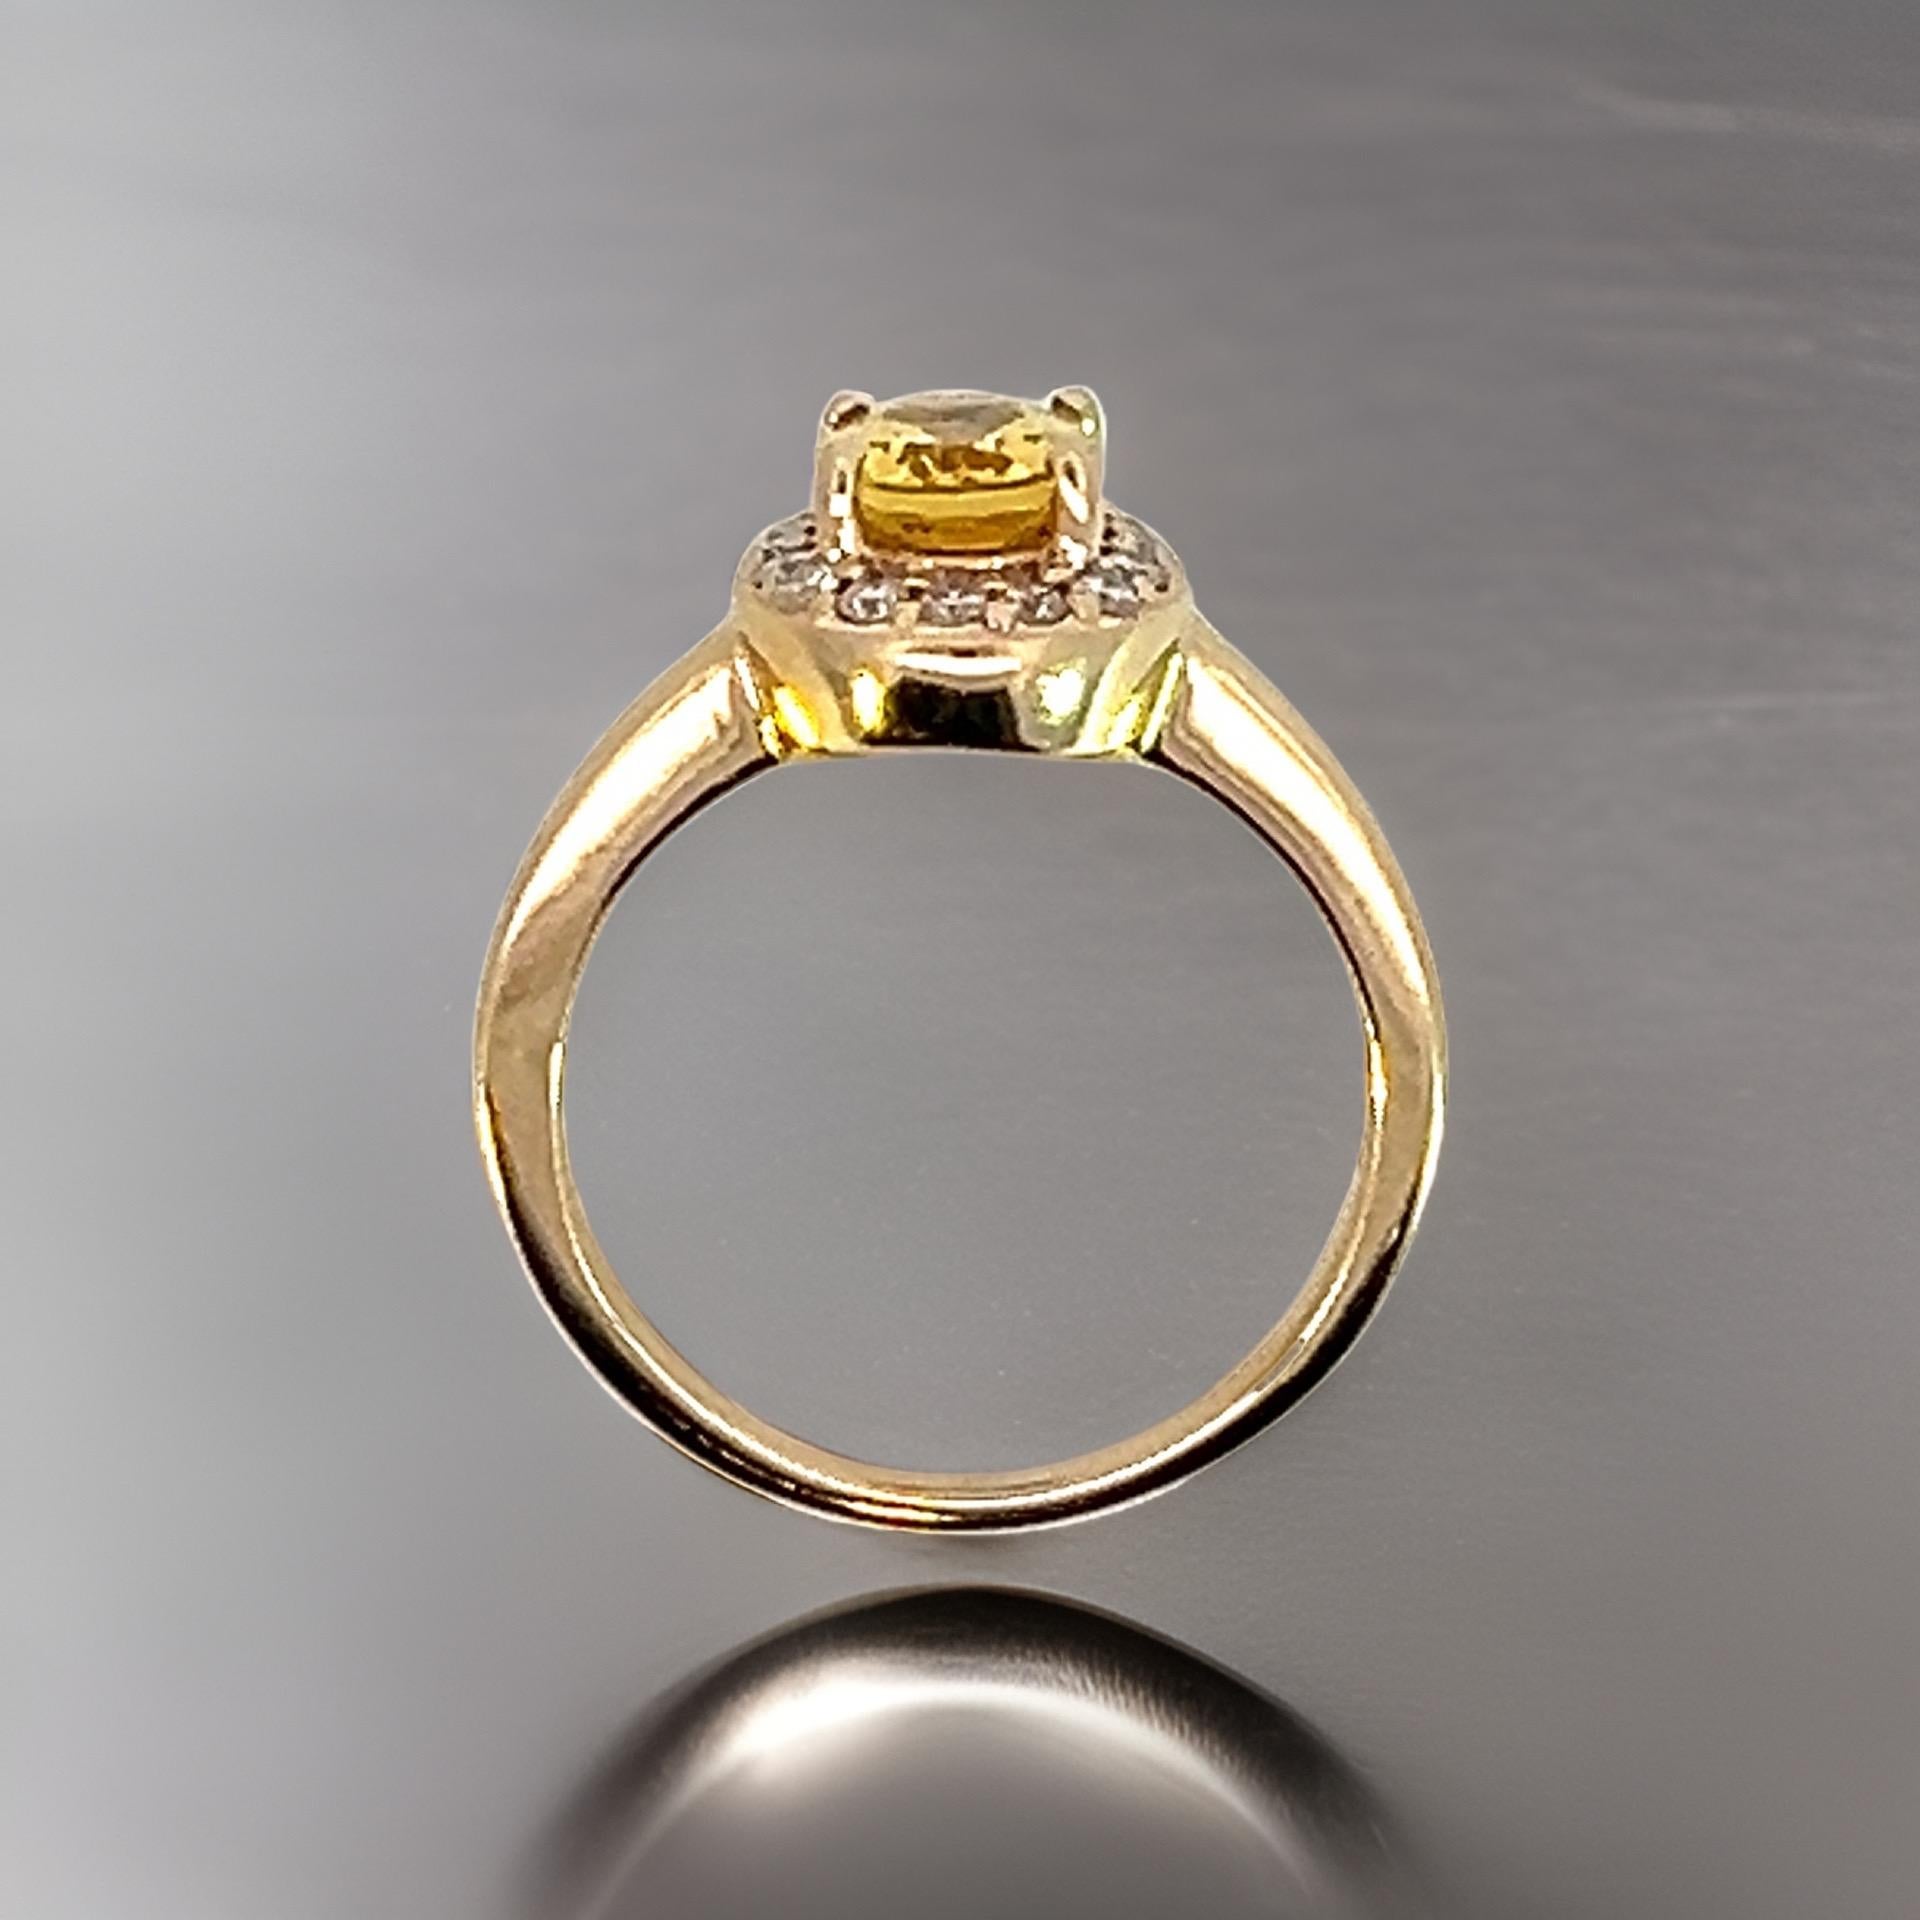 Natural Citrine Diamond Ring 6.5 14k Yellow Gold 1.74 TCW Certified For Sale 5